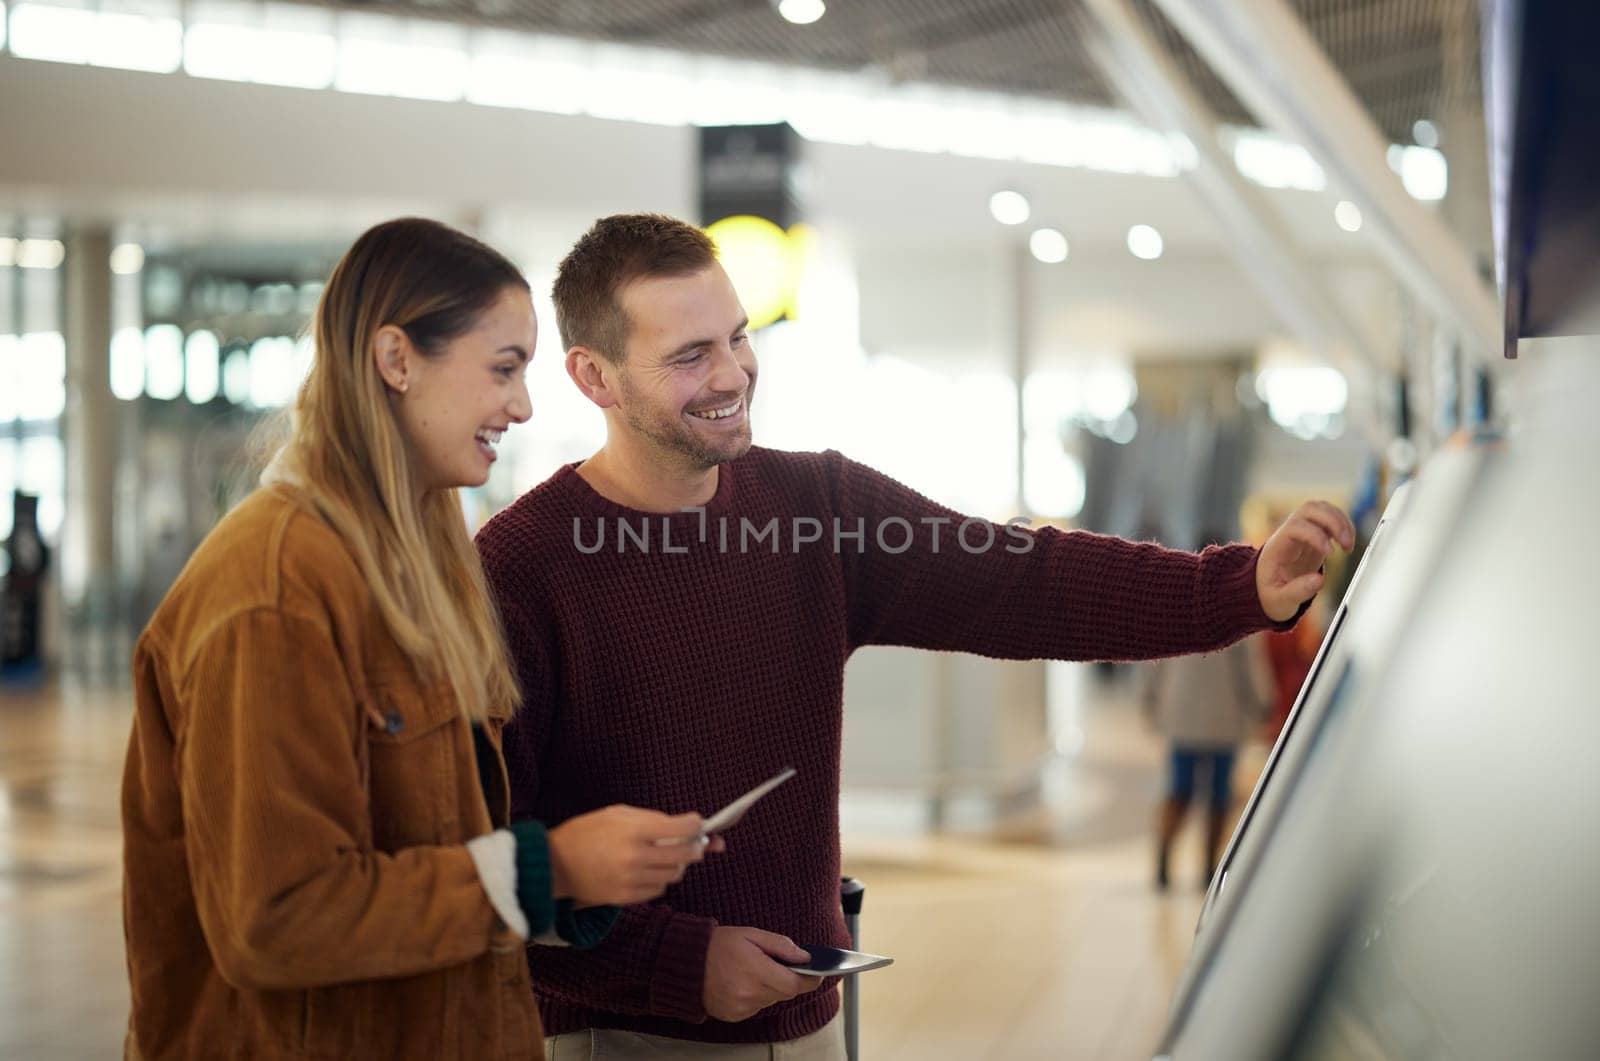 Couple in airport typing on self service screen for digital passport identity or flight data to travel on airplane. Smart check, woman or happy man pressing code for on futuristic technology at kiosk.